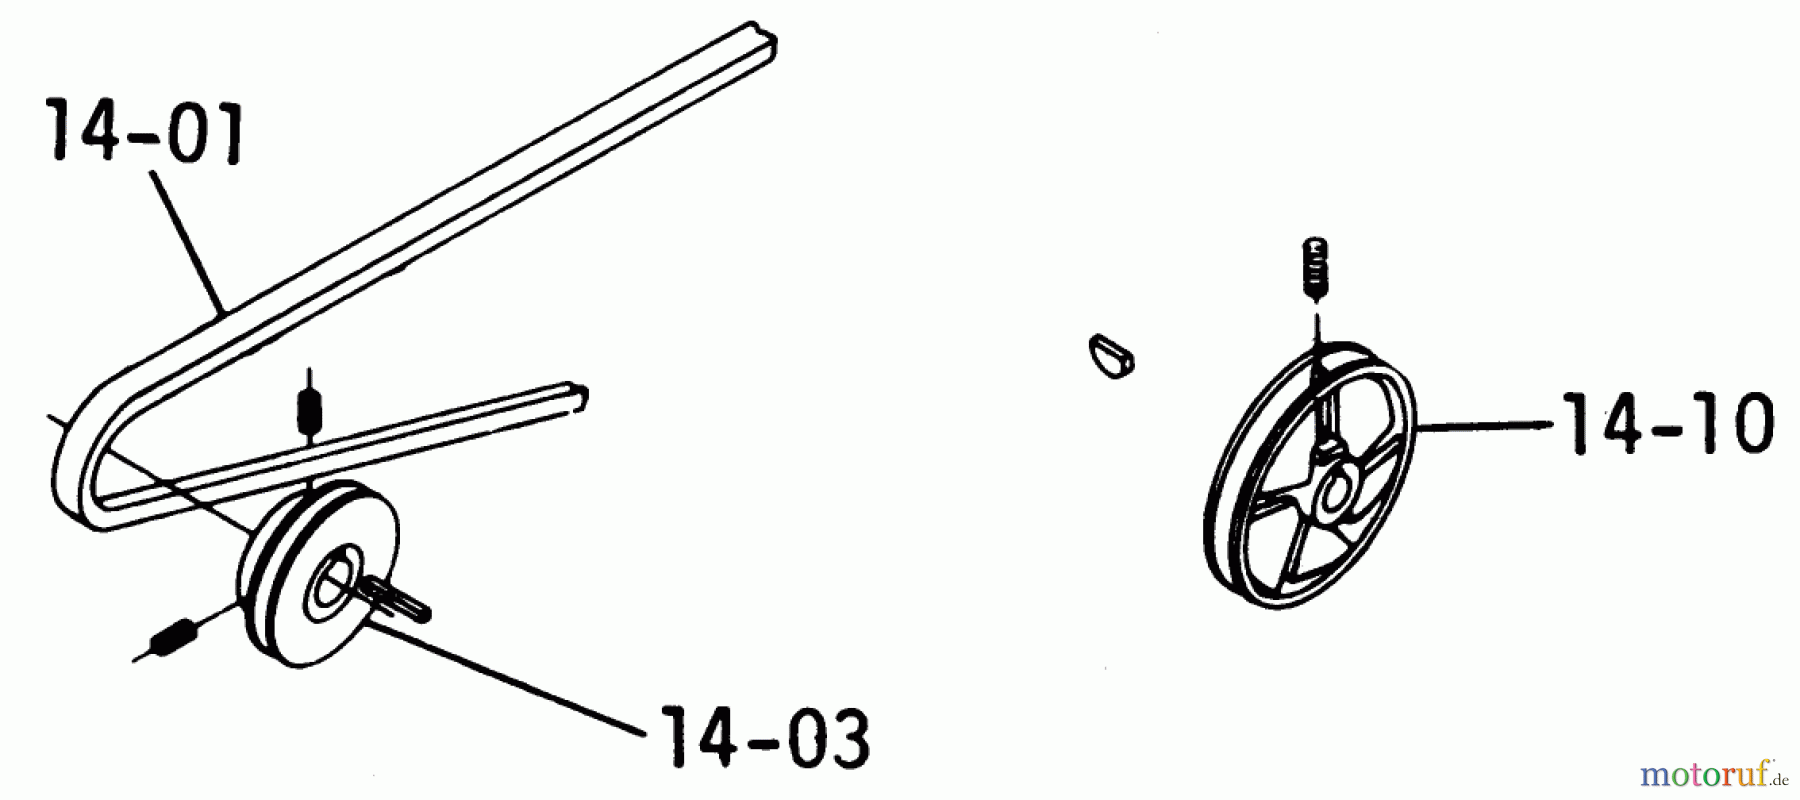  Toro Neu Mowers, Lawn & Garden Tractor Seite 1 1-0396 (C-120) - Toro C-120 8-Speed Tractor, 1975 14.000 DRIVE BELTS AND PULLEYS (FIG. 14A)